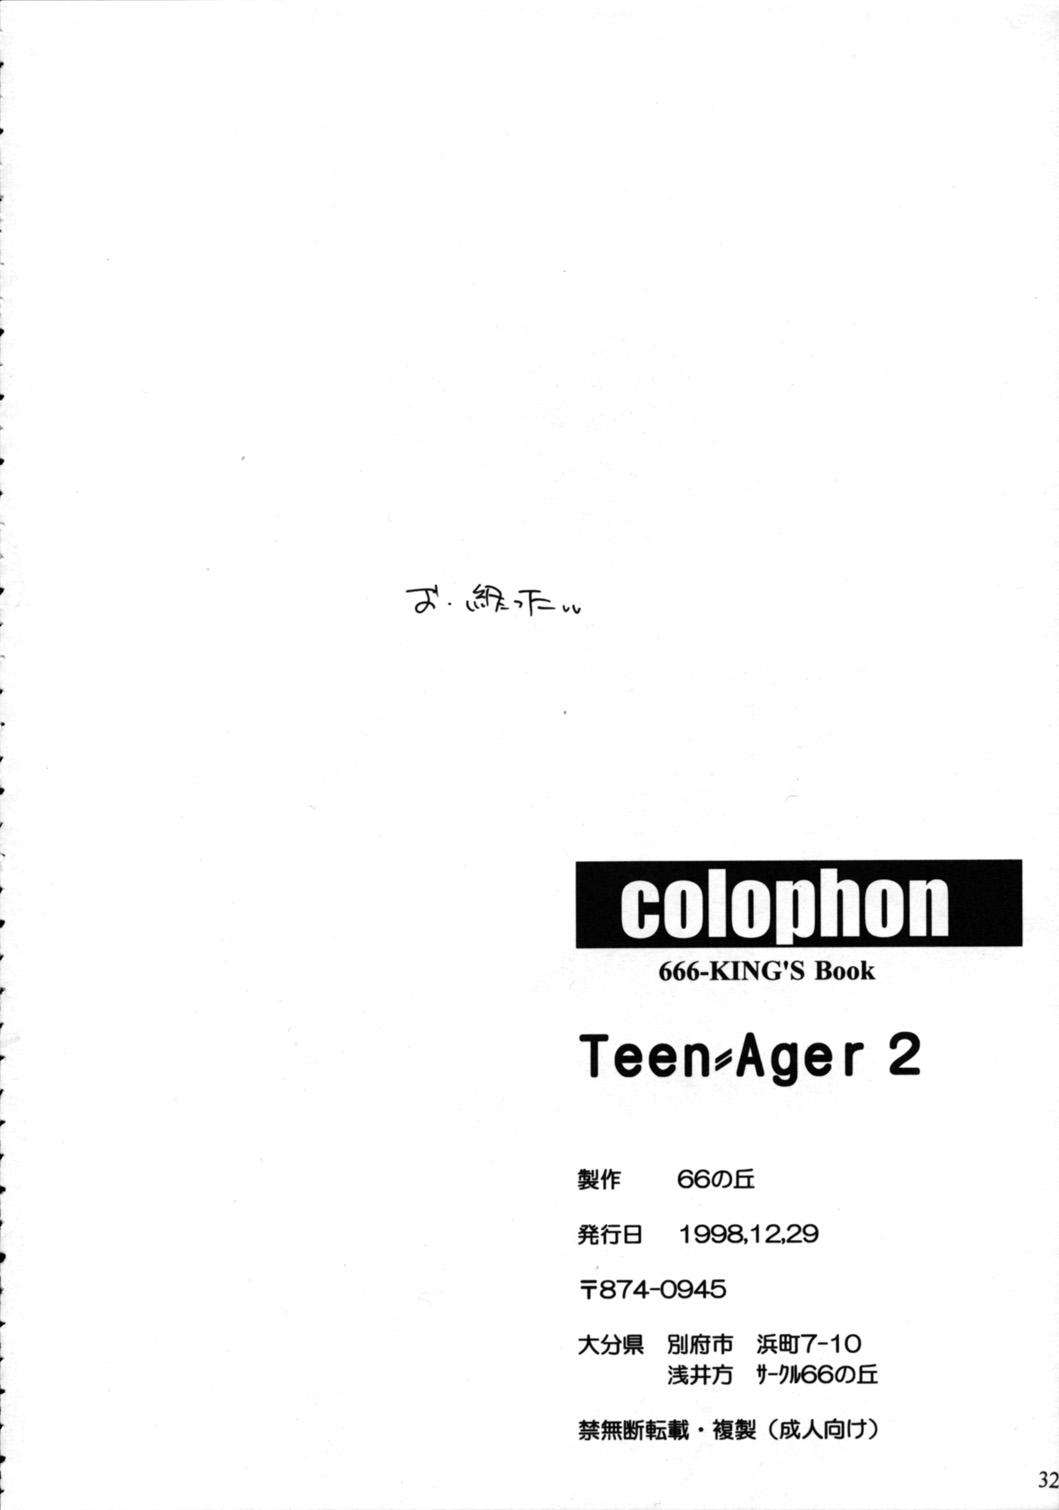 Teen-Ager 2 32